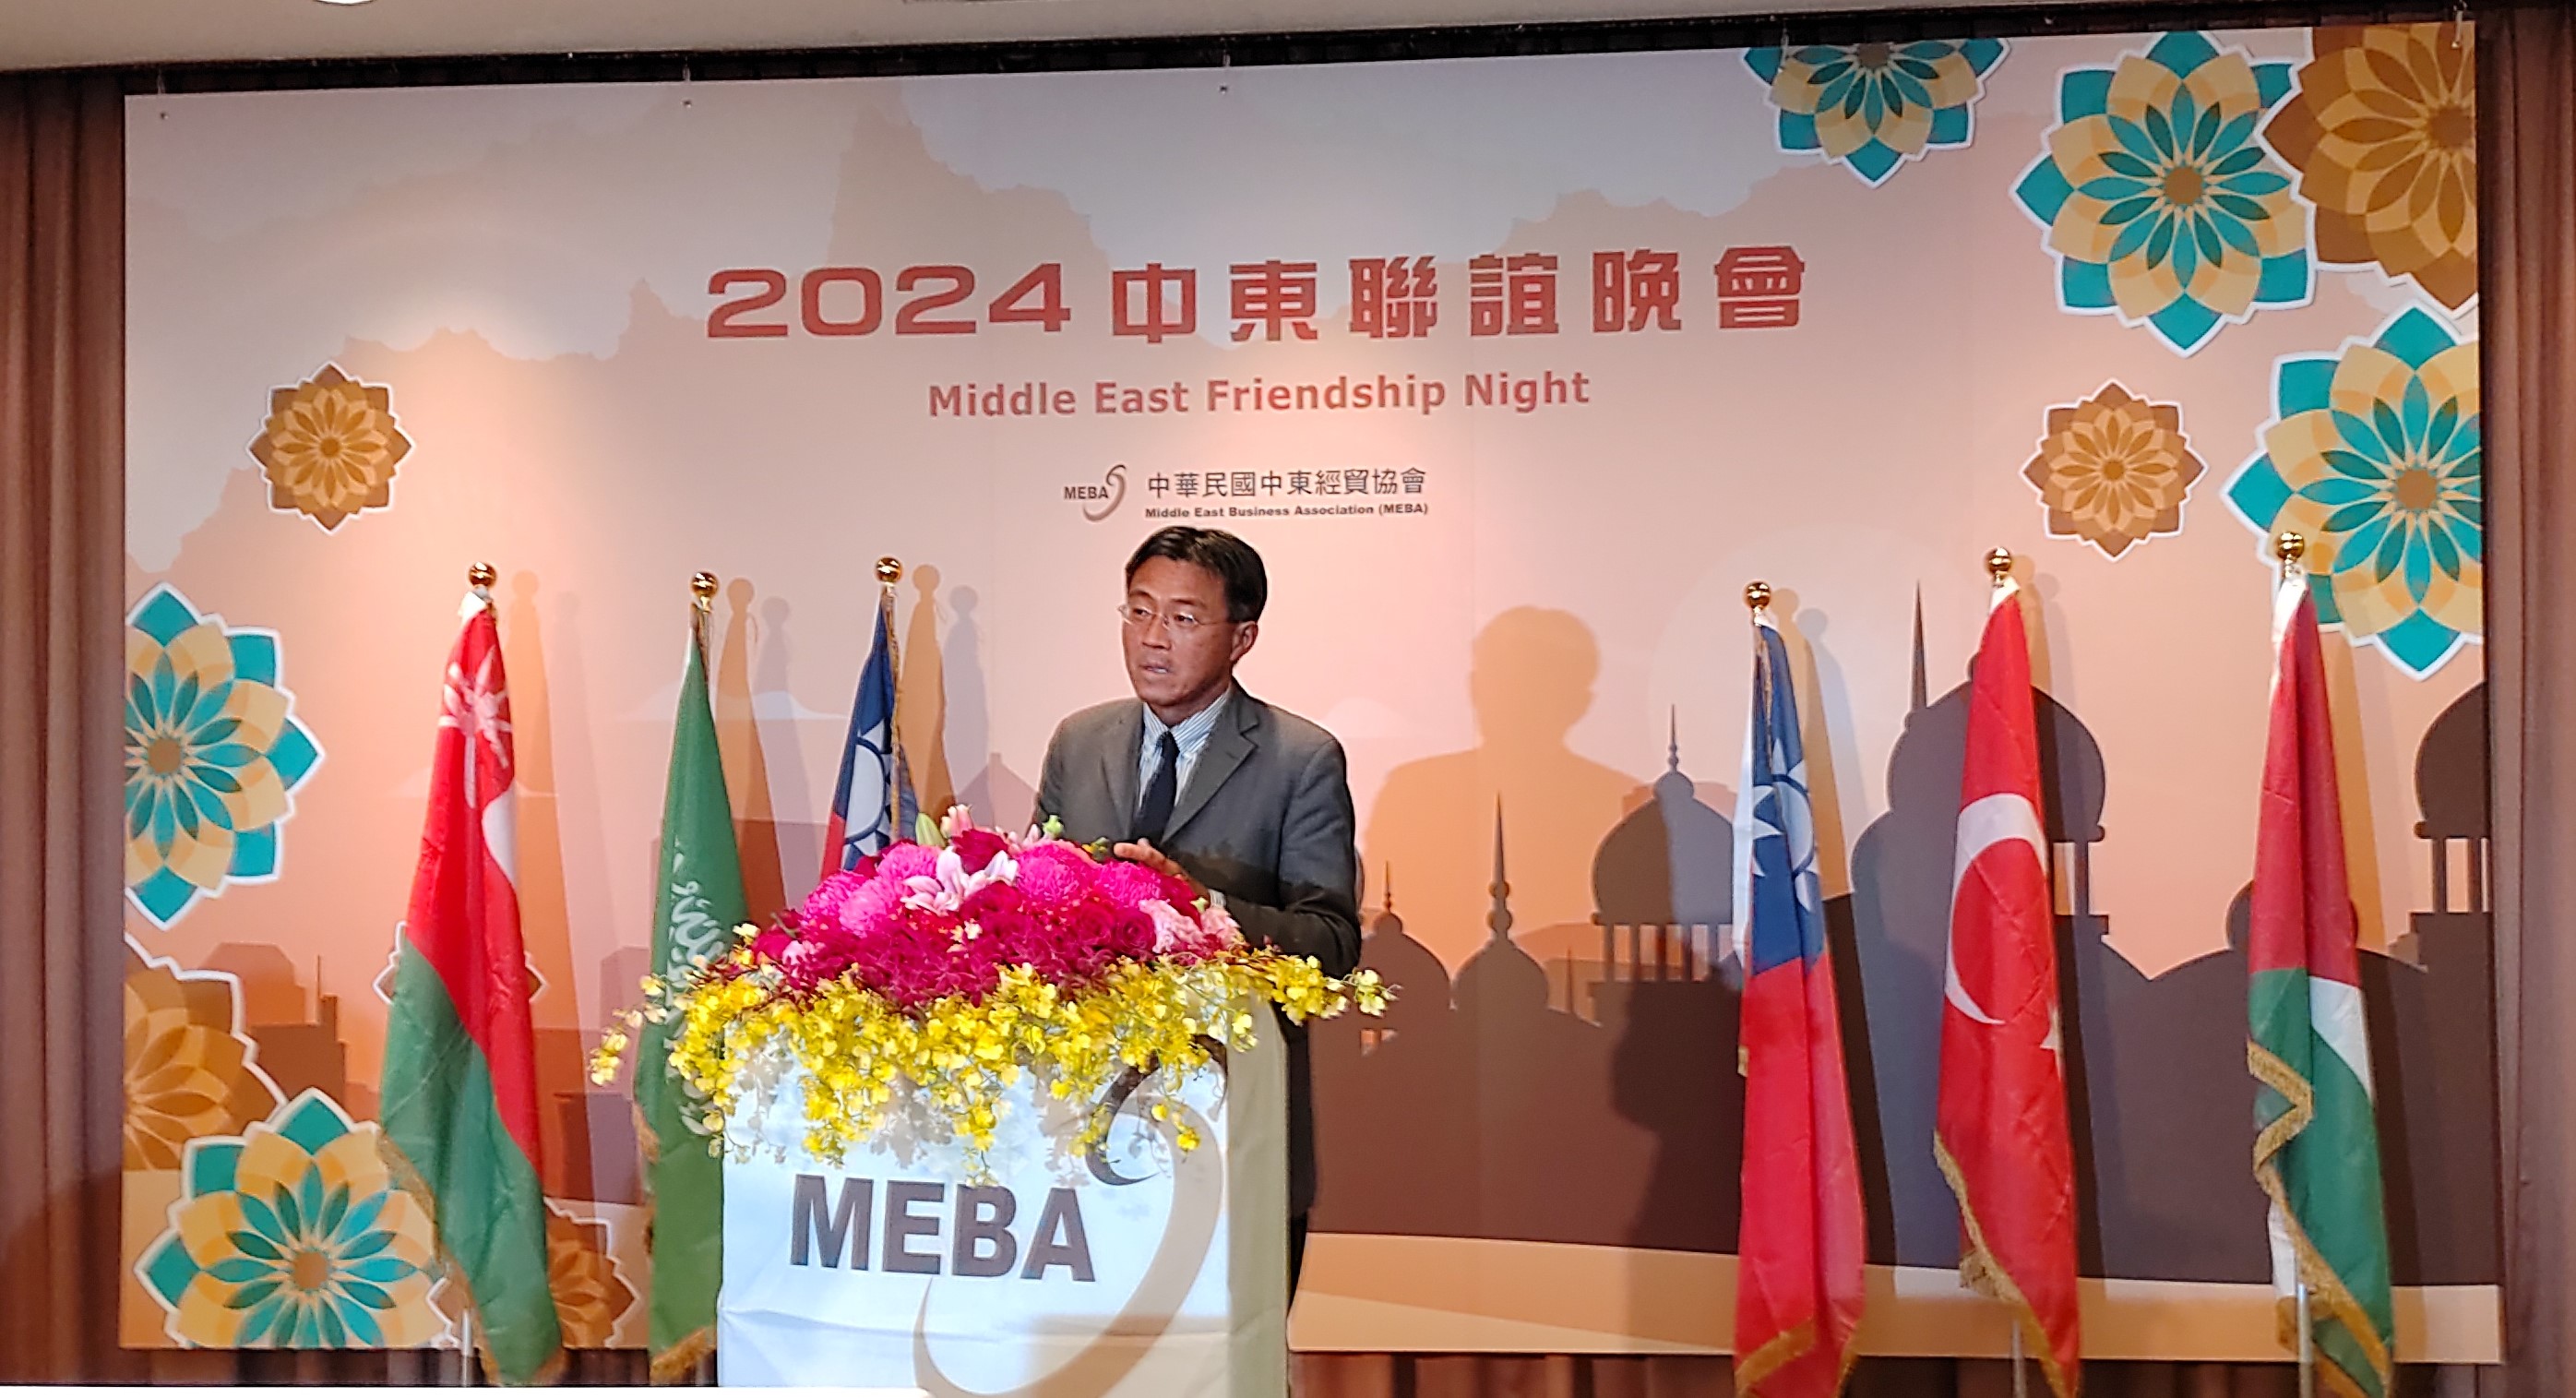 Deputy General Director Lee attended the “2024 Middle East Friendship Night” on February 20, 2024